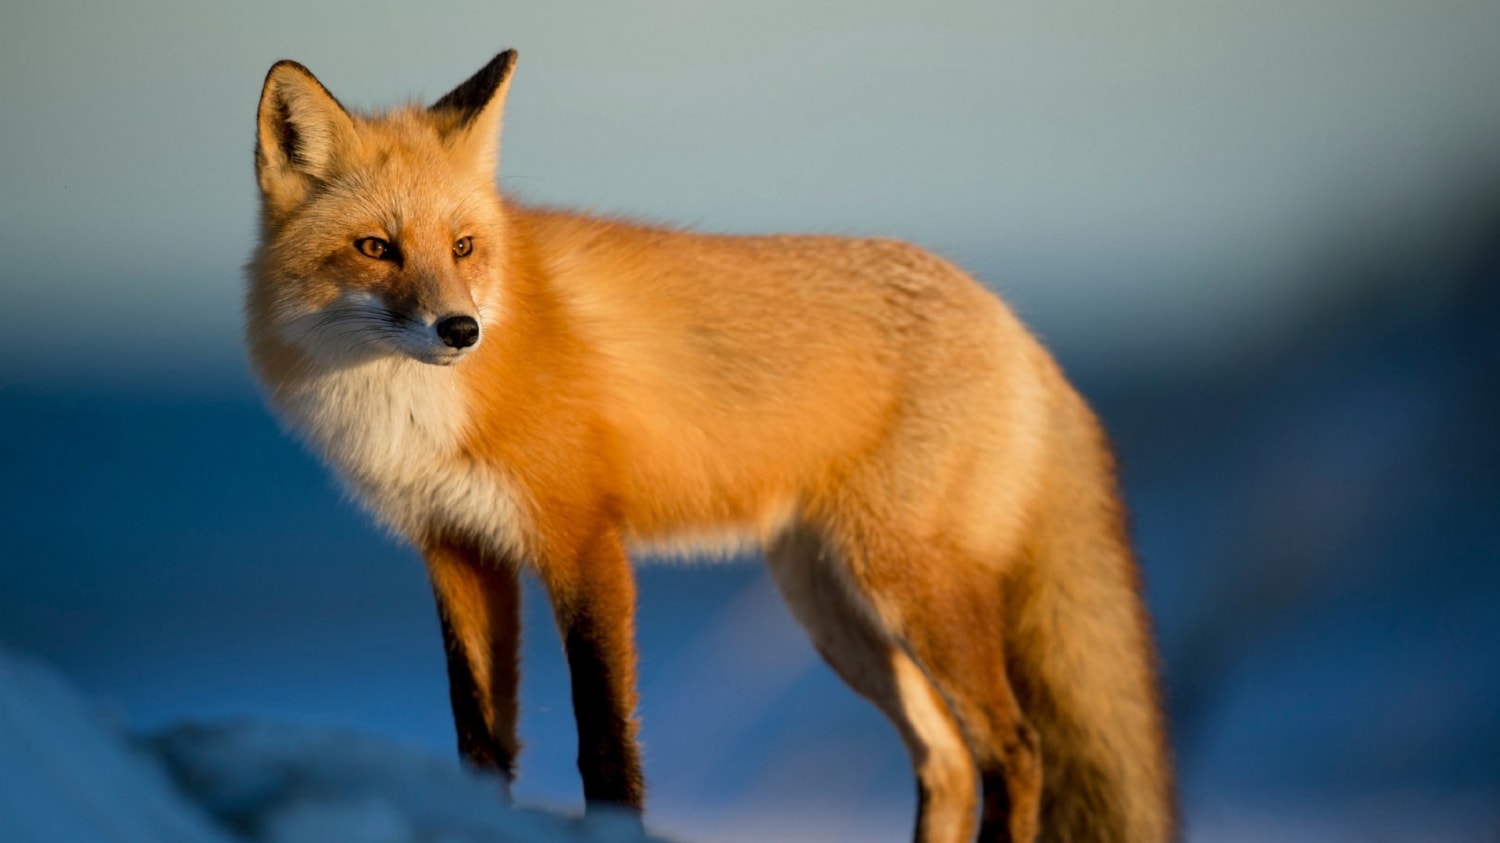 The red fox (Vulpes vulpes) is the largest of the true foxes and is easily one of the most well-known members of the canid family. Its sheer adaptability in a wide variety of habitats including suburban and urban areas has made it the most widely distributed wild land mammal.